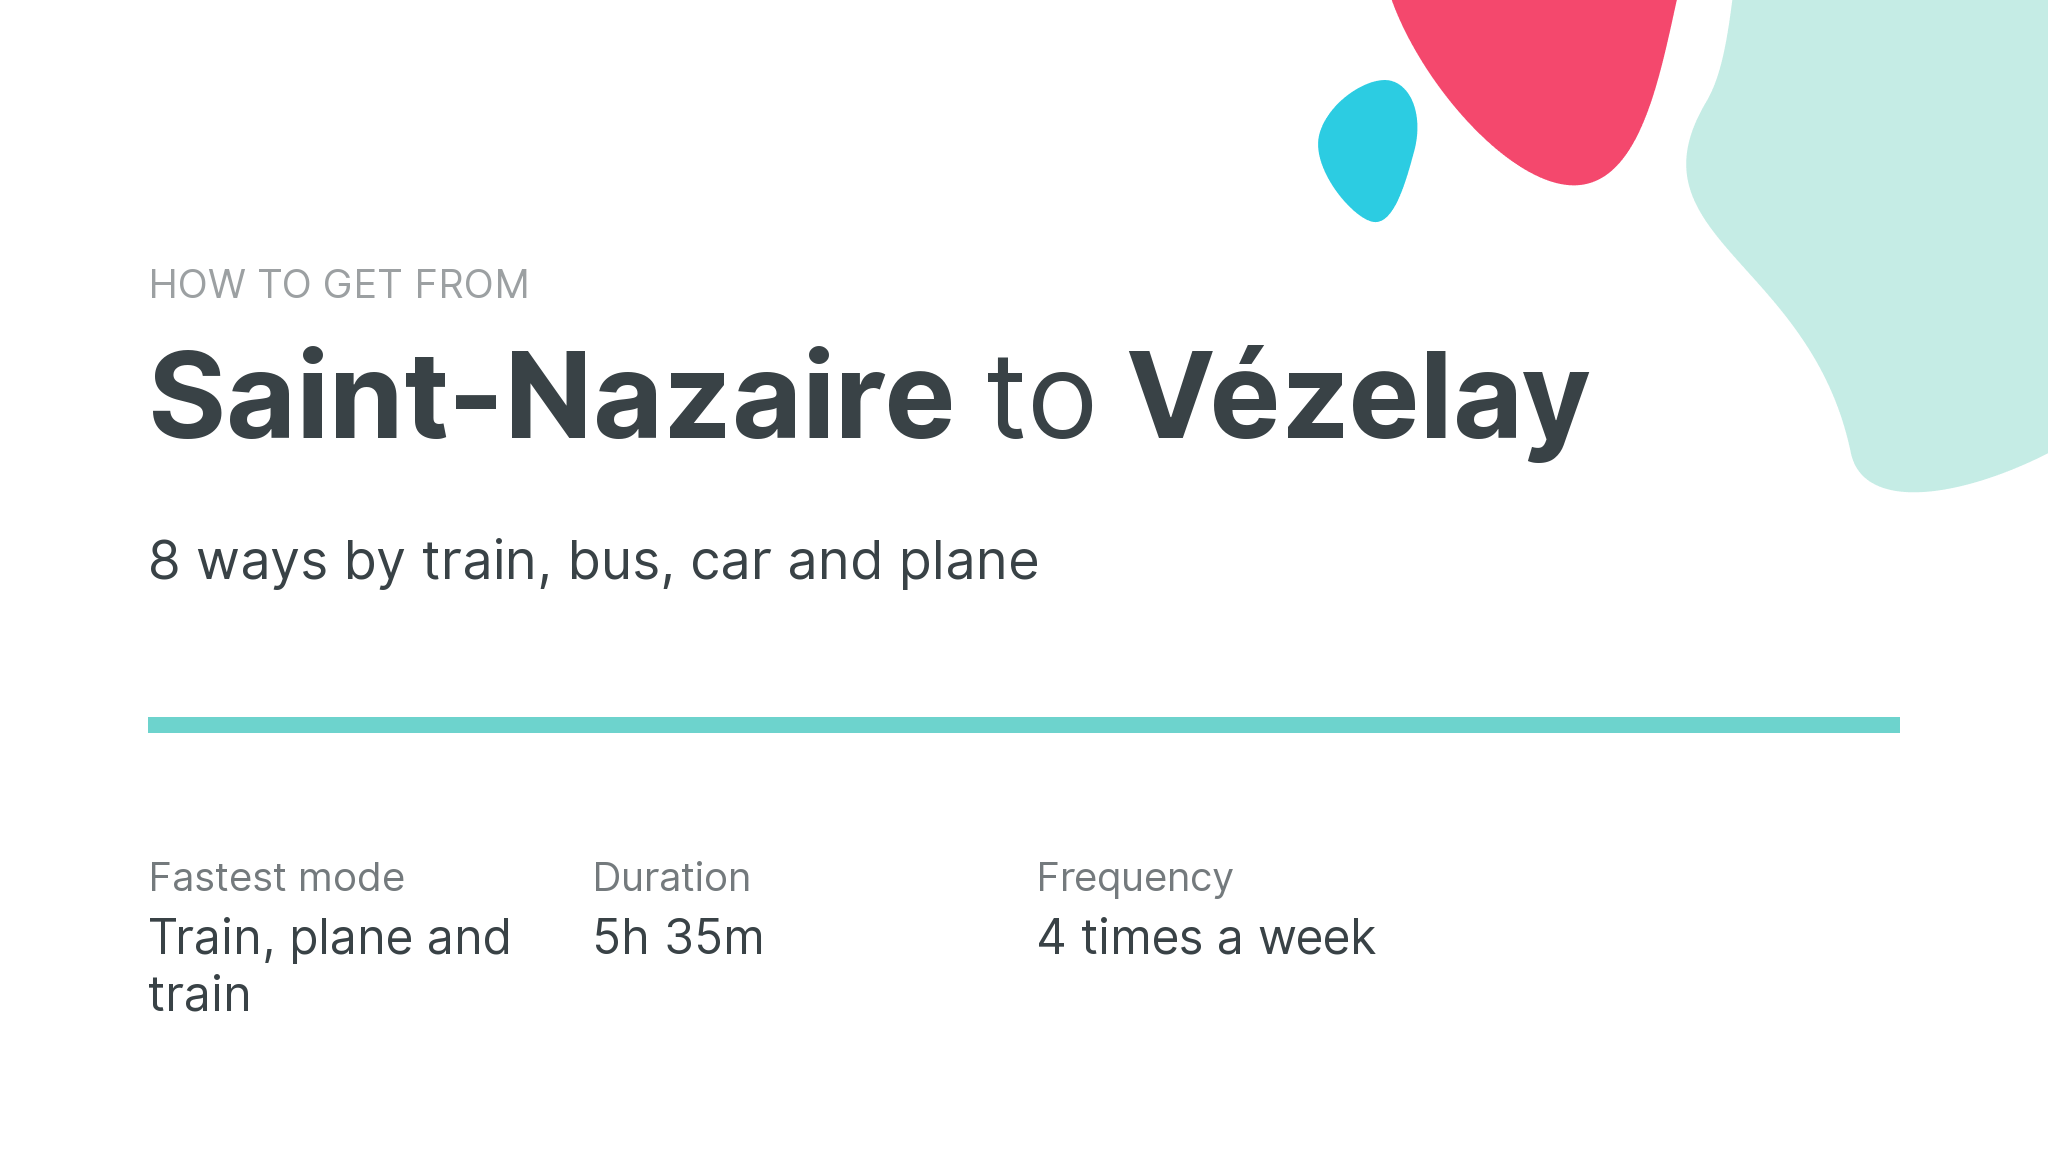 How do I get from Saint-Nazaire to Vézelay